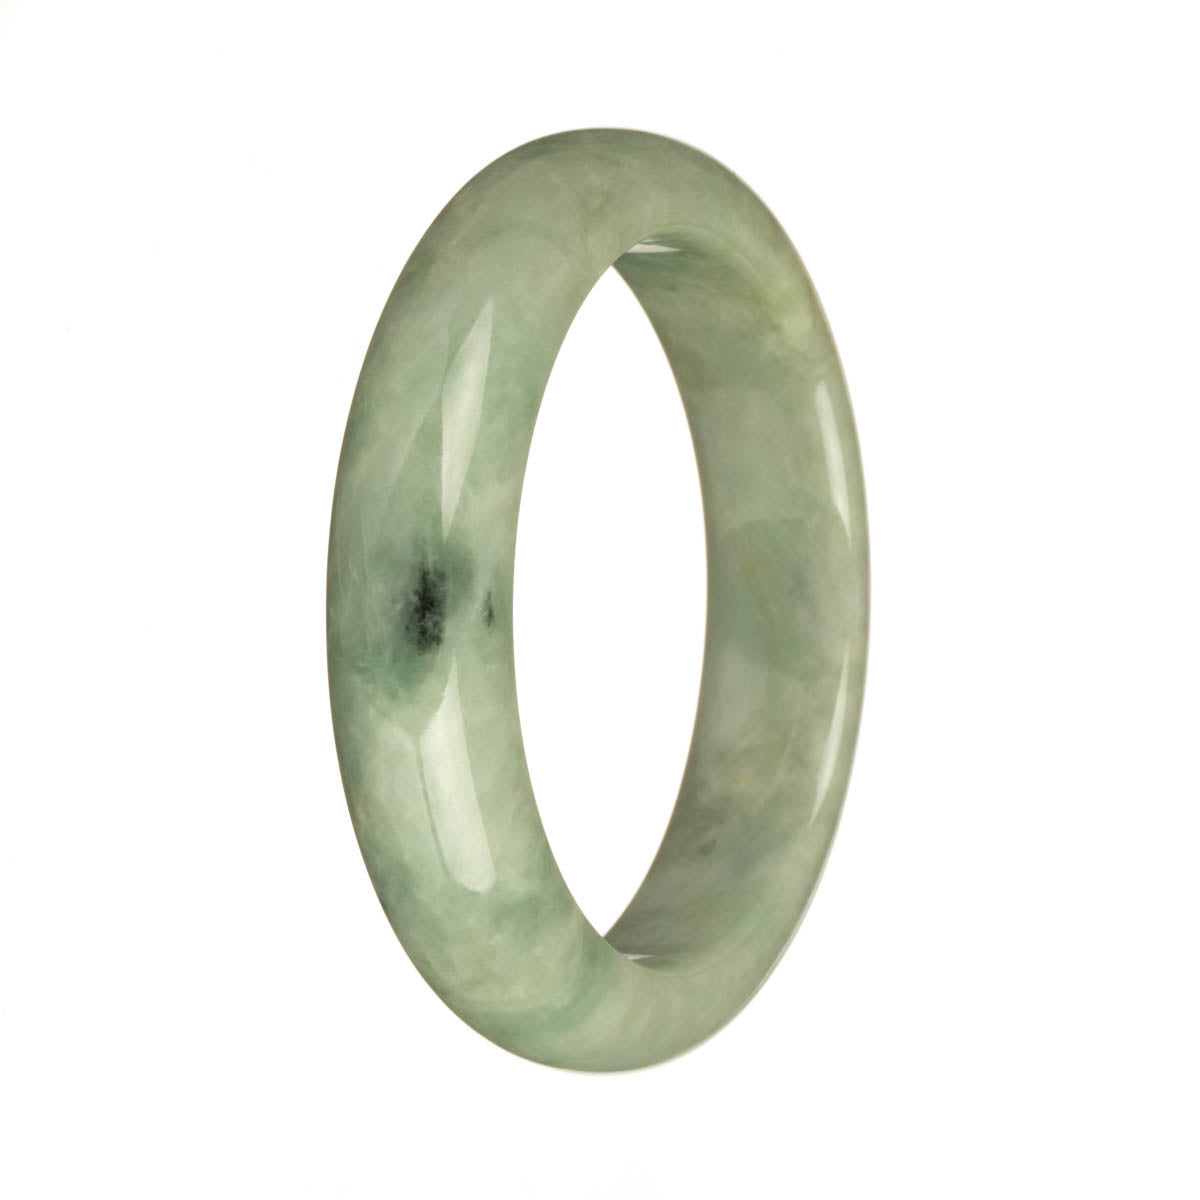 A stunning traditional jade bracelet with a Real Grade A Light Green color. The bracelet features beautiful Apple Green and Deep Green patterns. It is in a Half Moon shape and measures 57mm. A perfect accessory to add elegance to any outfit.